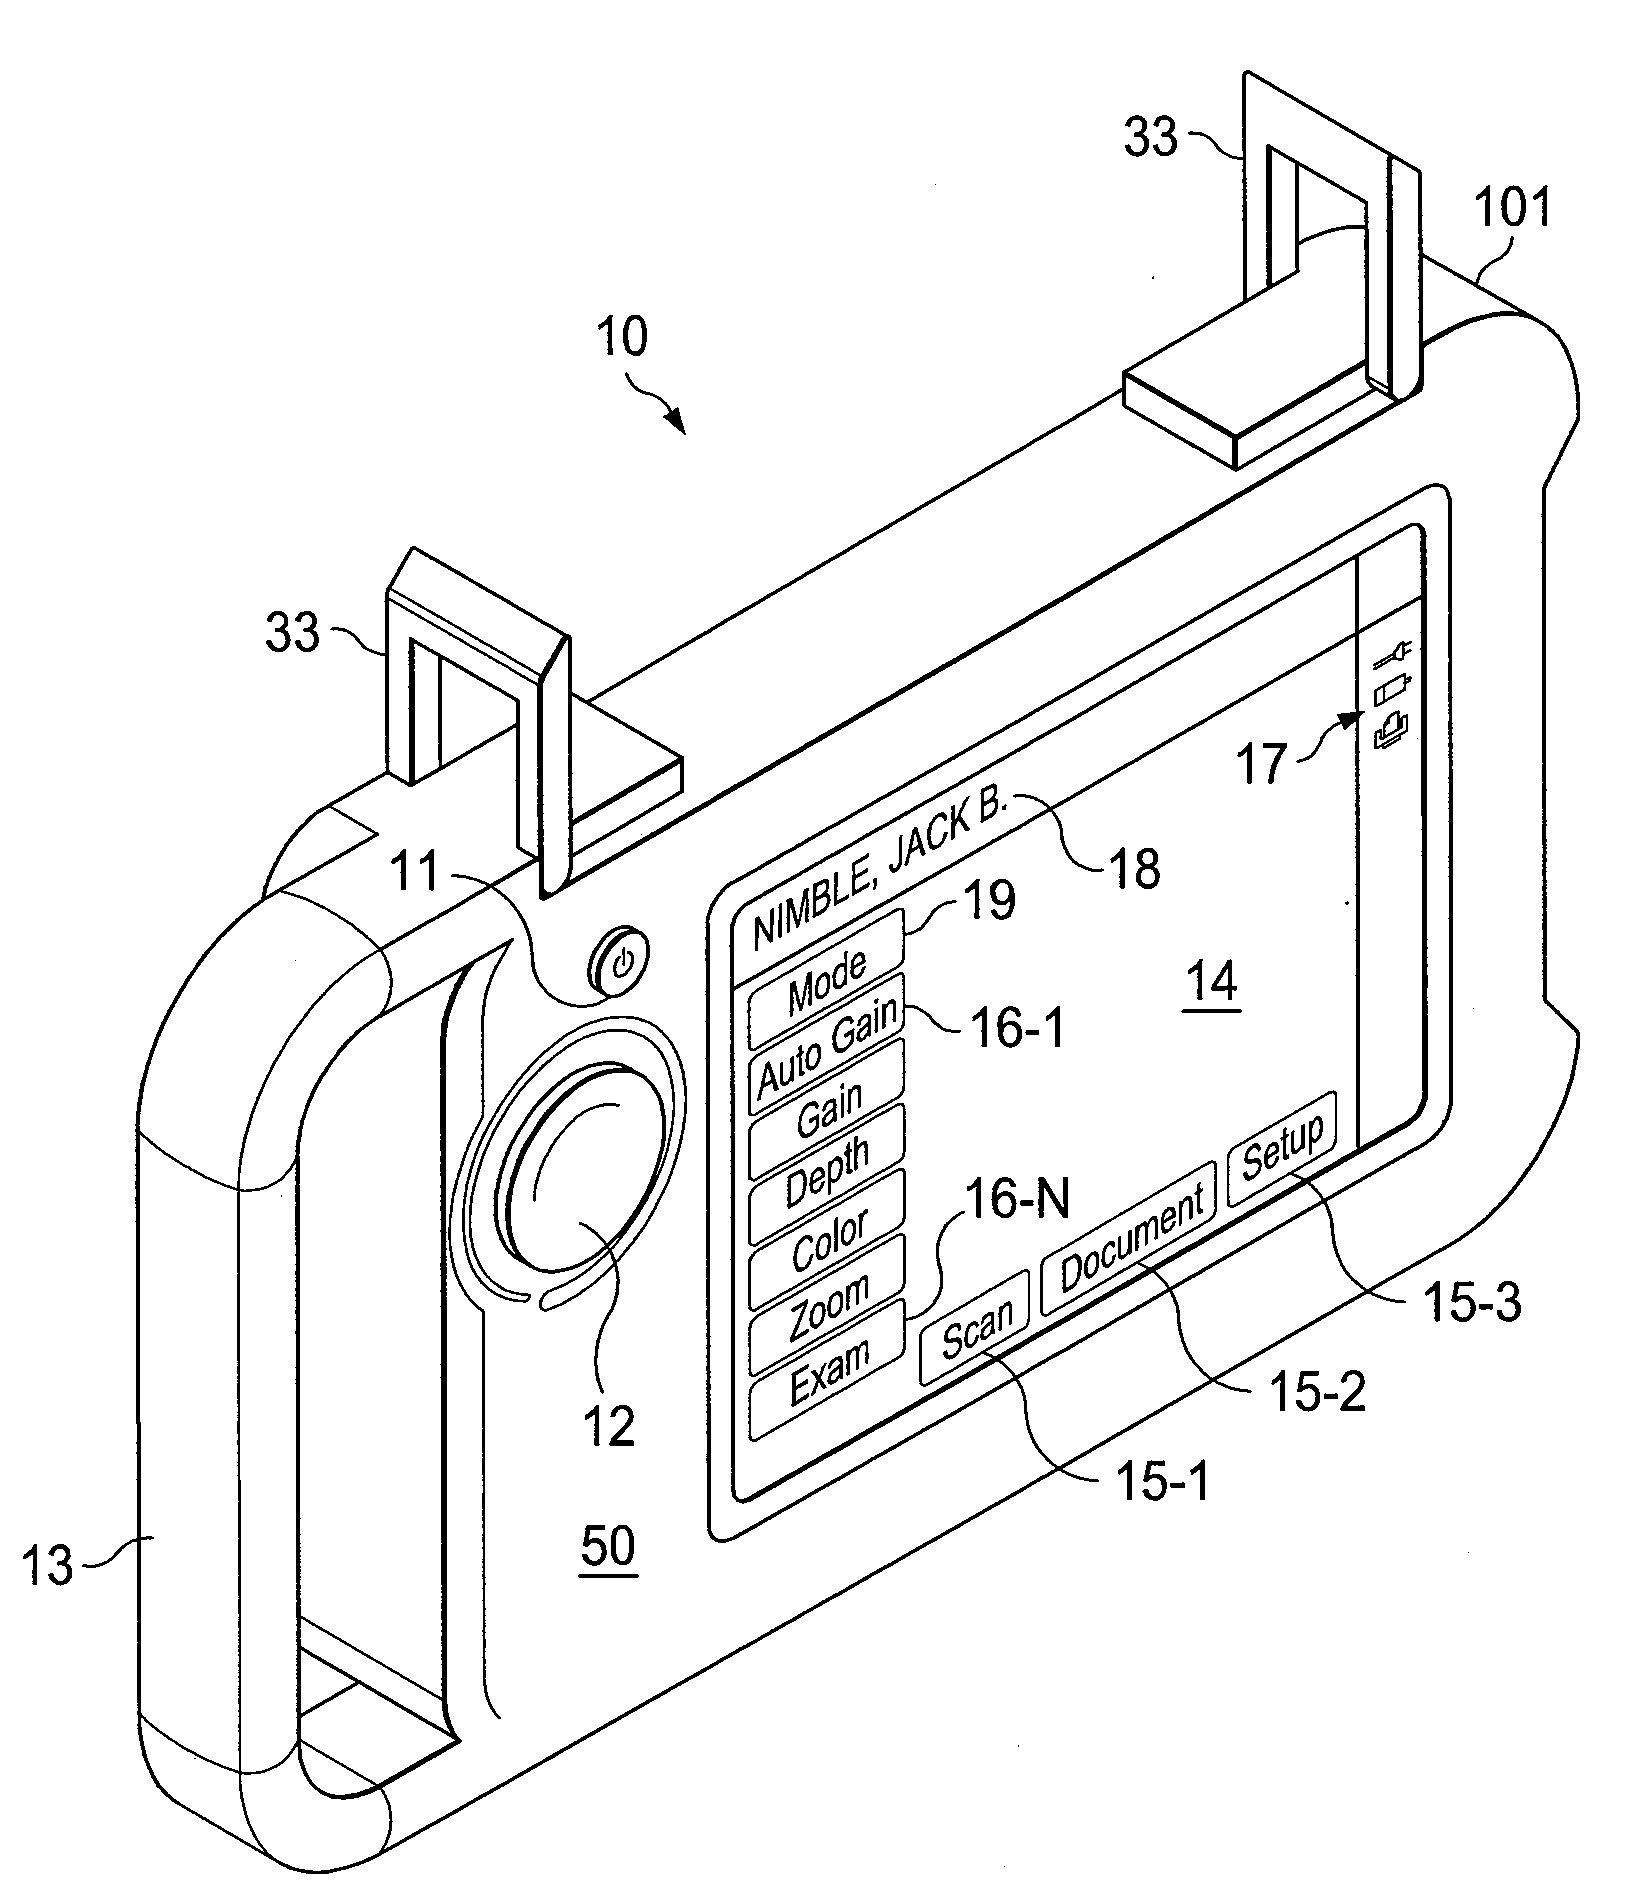 Ultrasound system having a simplified user interface